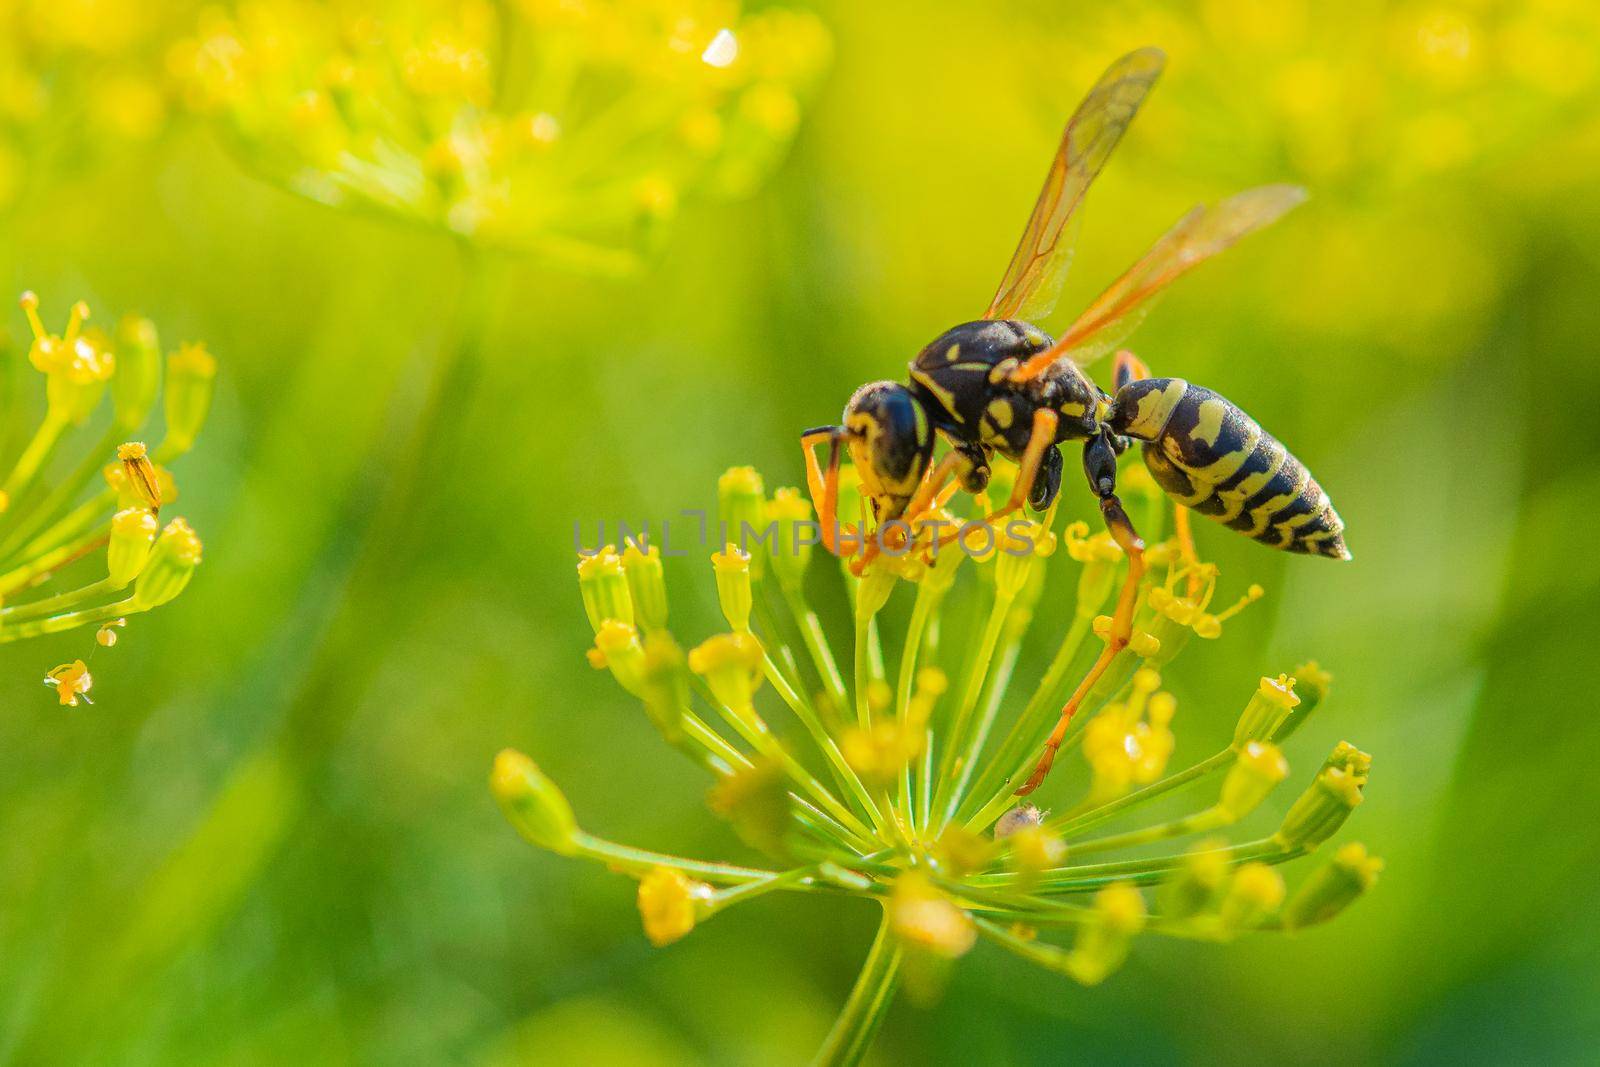 A heavy wasp, with difficulty holding on to the staggering dill flowers, drinks nectar from them.